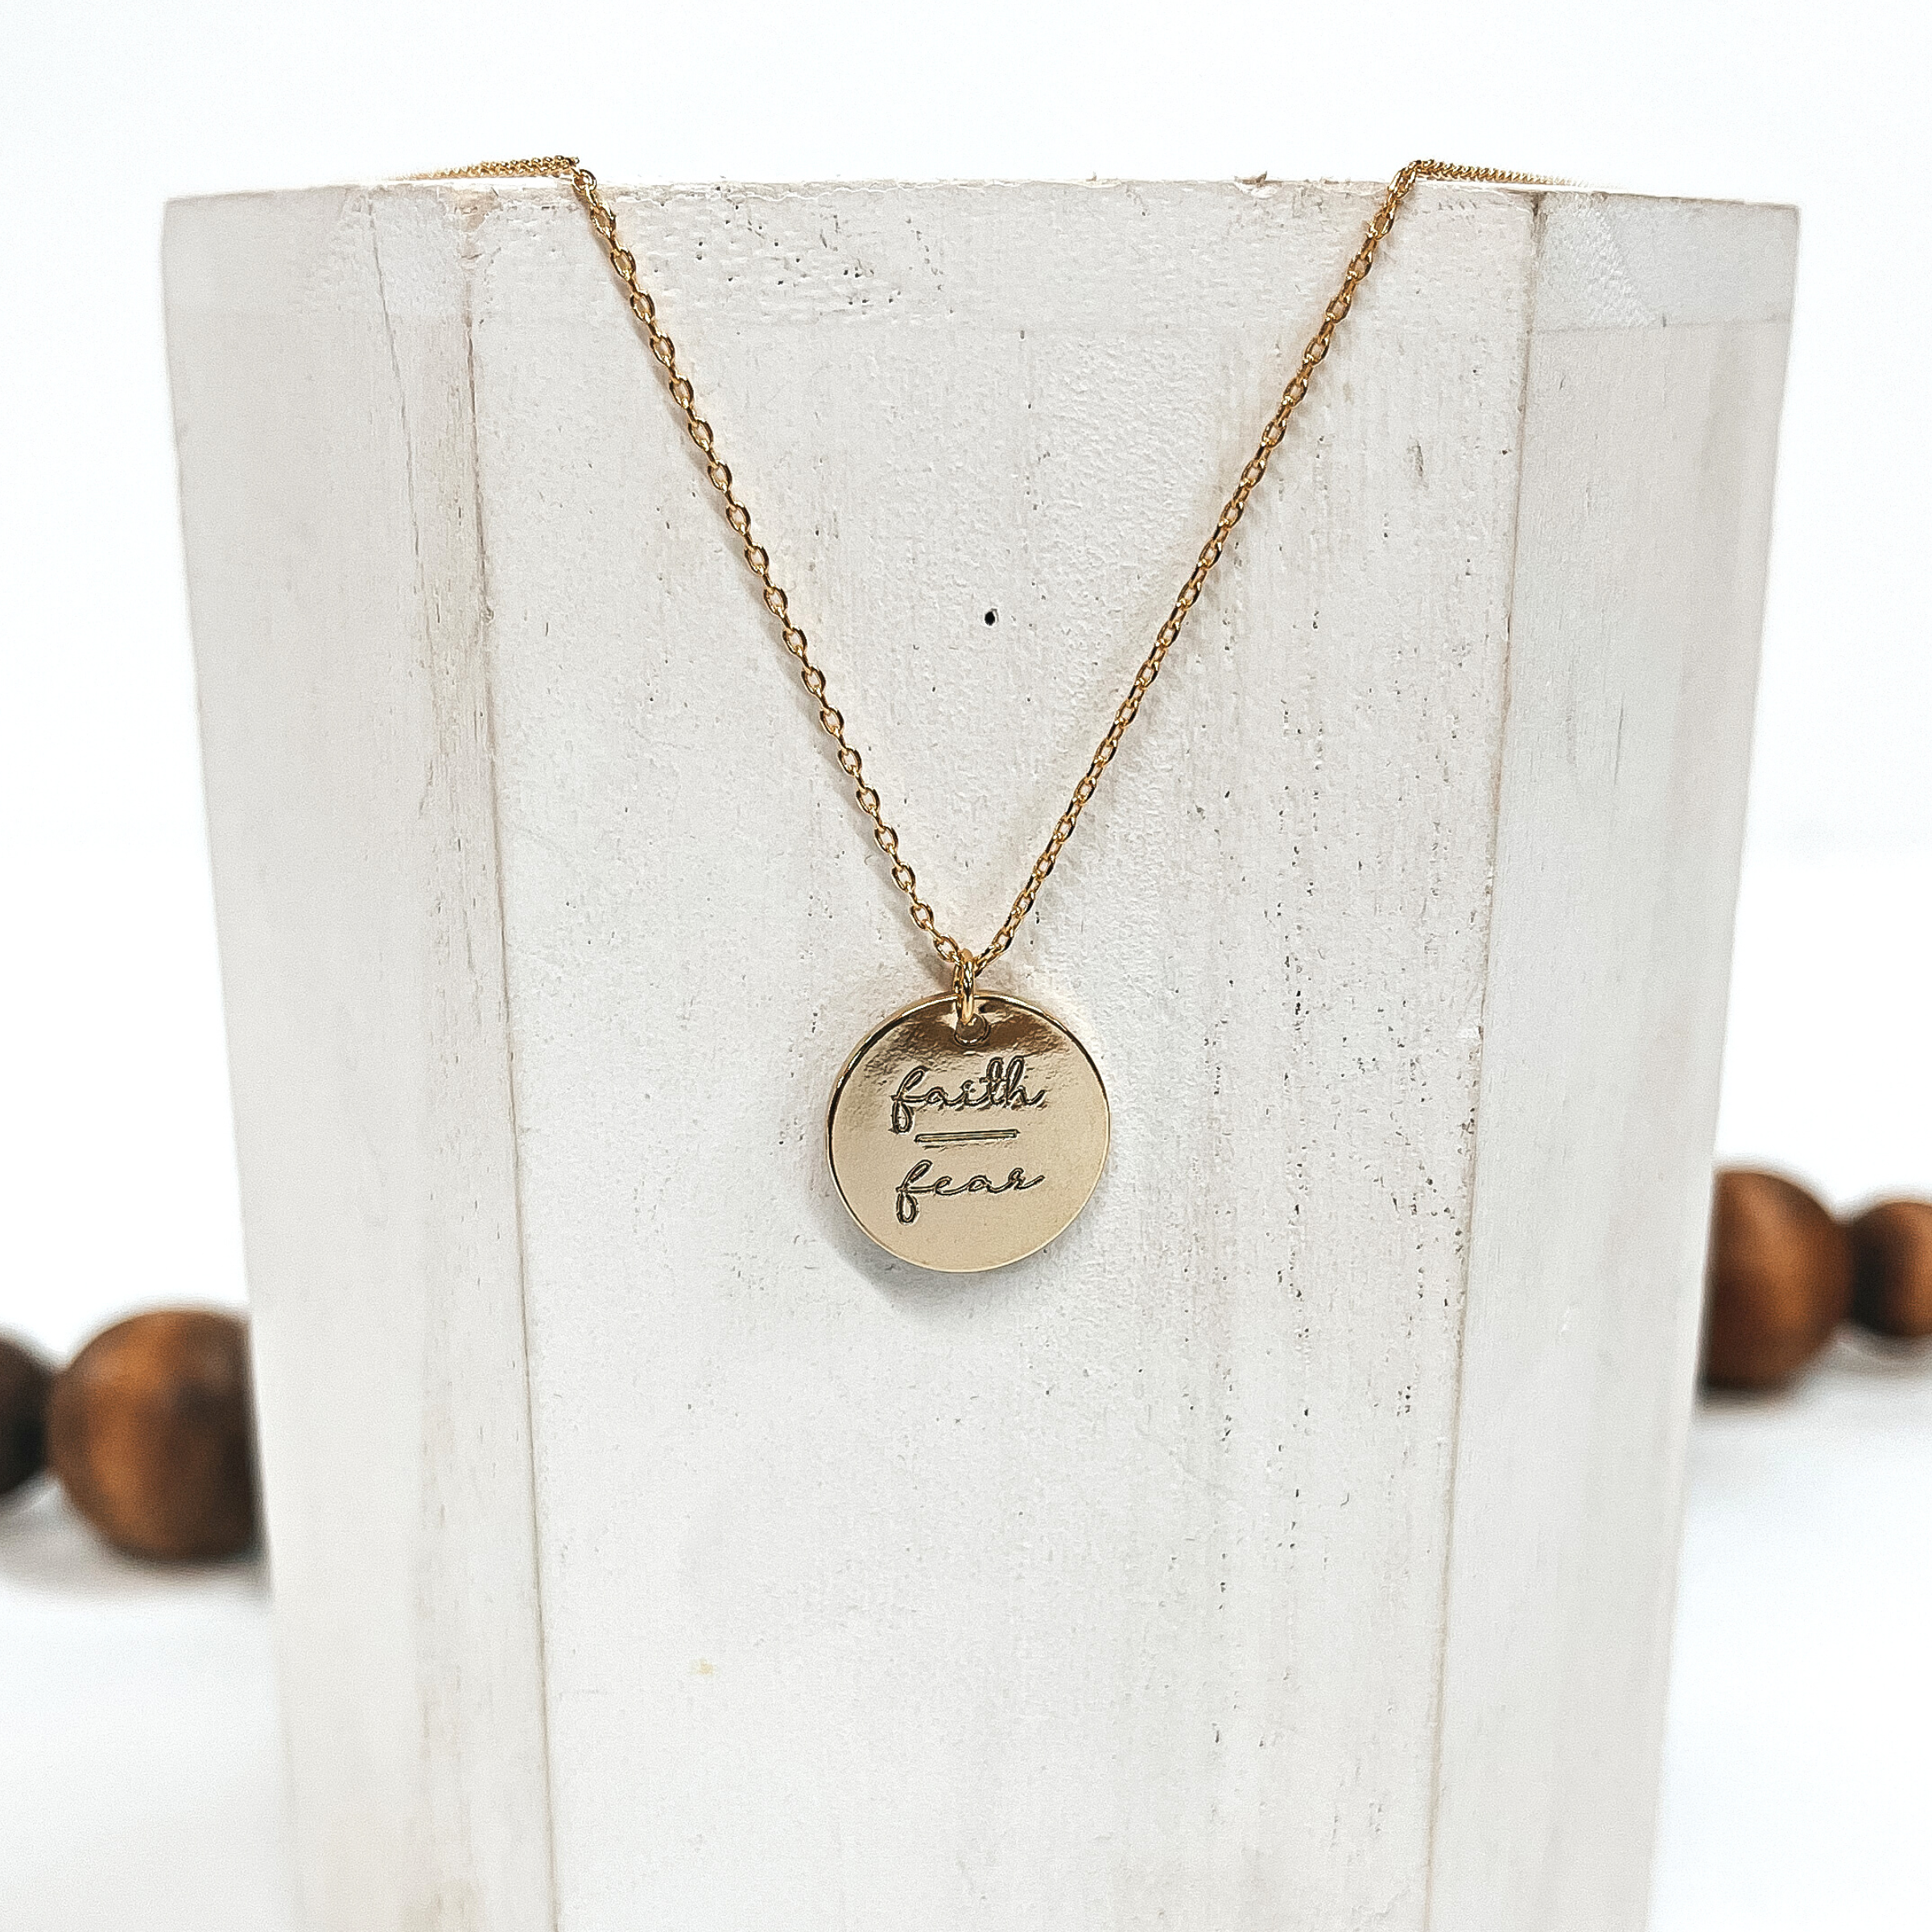 This is a thin gold necklace with a gold pendant that says, 'Faith over fear'.  This necklace is taken on a white block and on a white background with brown  beads in the back as decor.